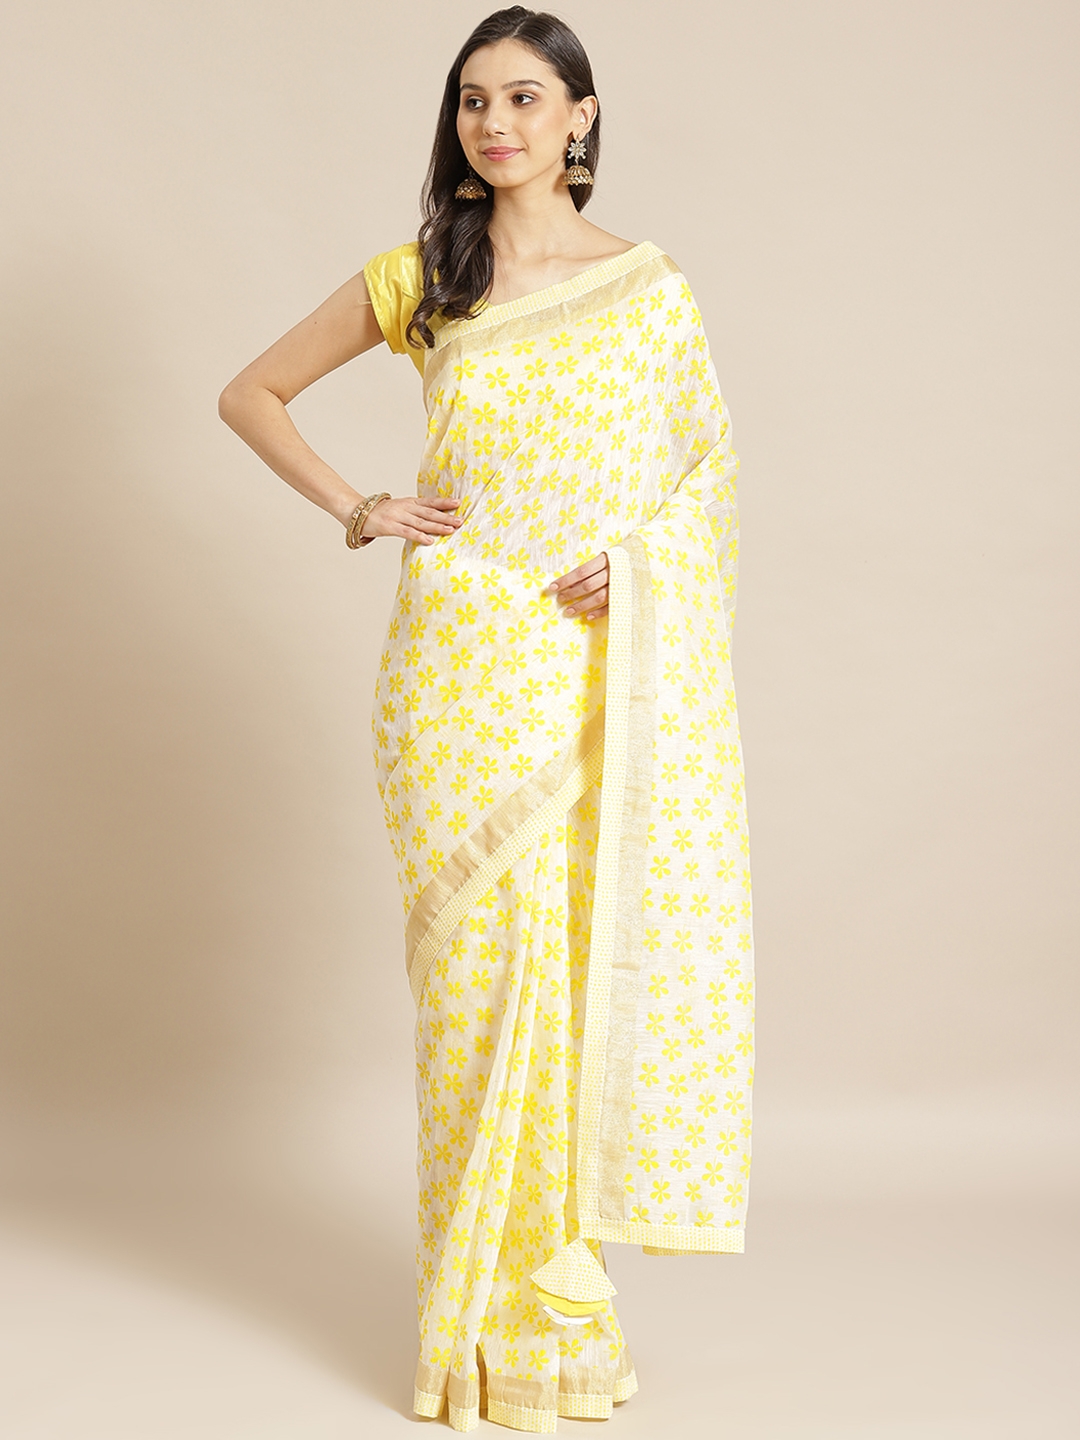 Which Masaba saree is more your style? Cow print or camera print? Check  them out at: http://www.perniaspopupshop.com/designers-1/masaba